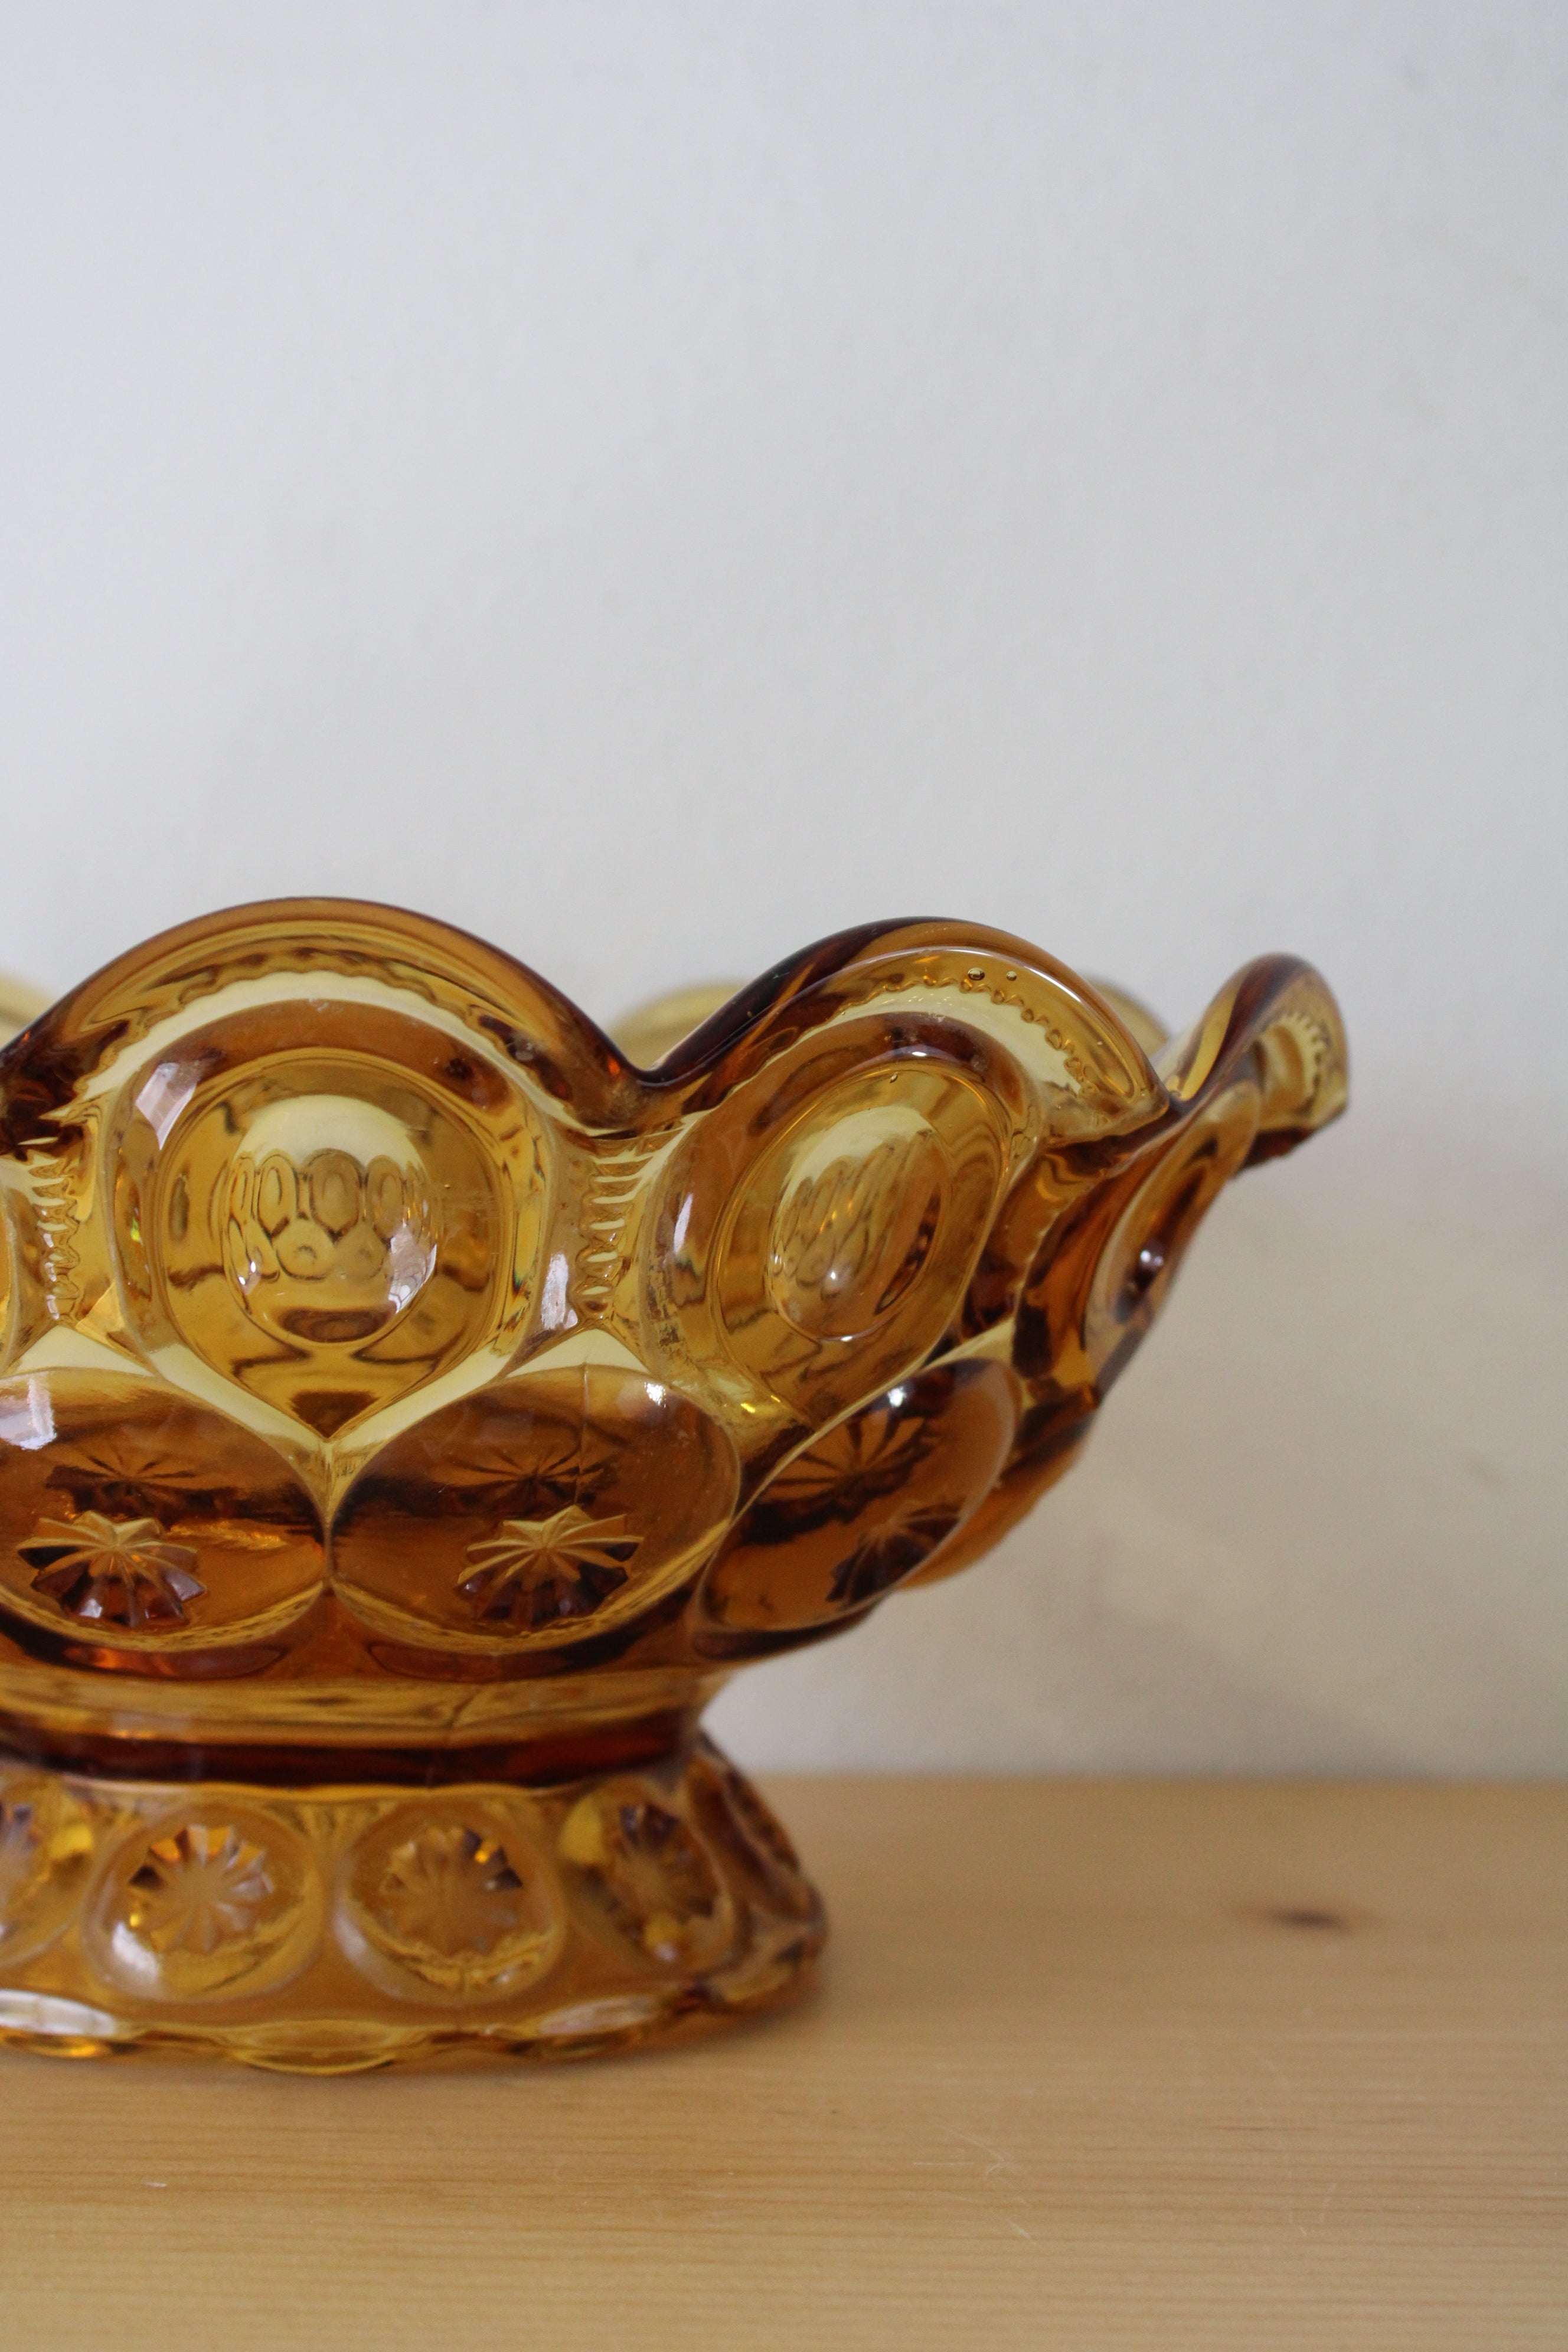 Vintage Moon And Stars Scalloped Amber Glass Footed Serving Bowl